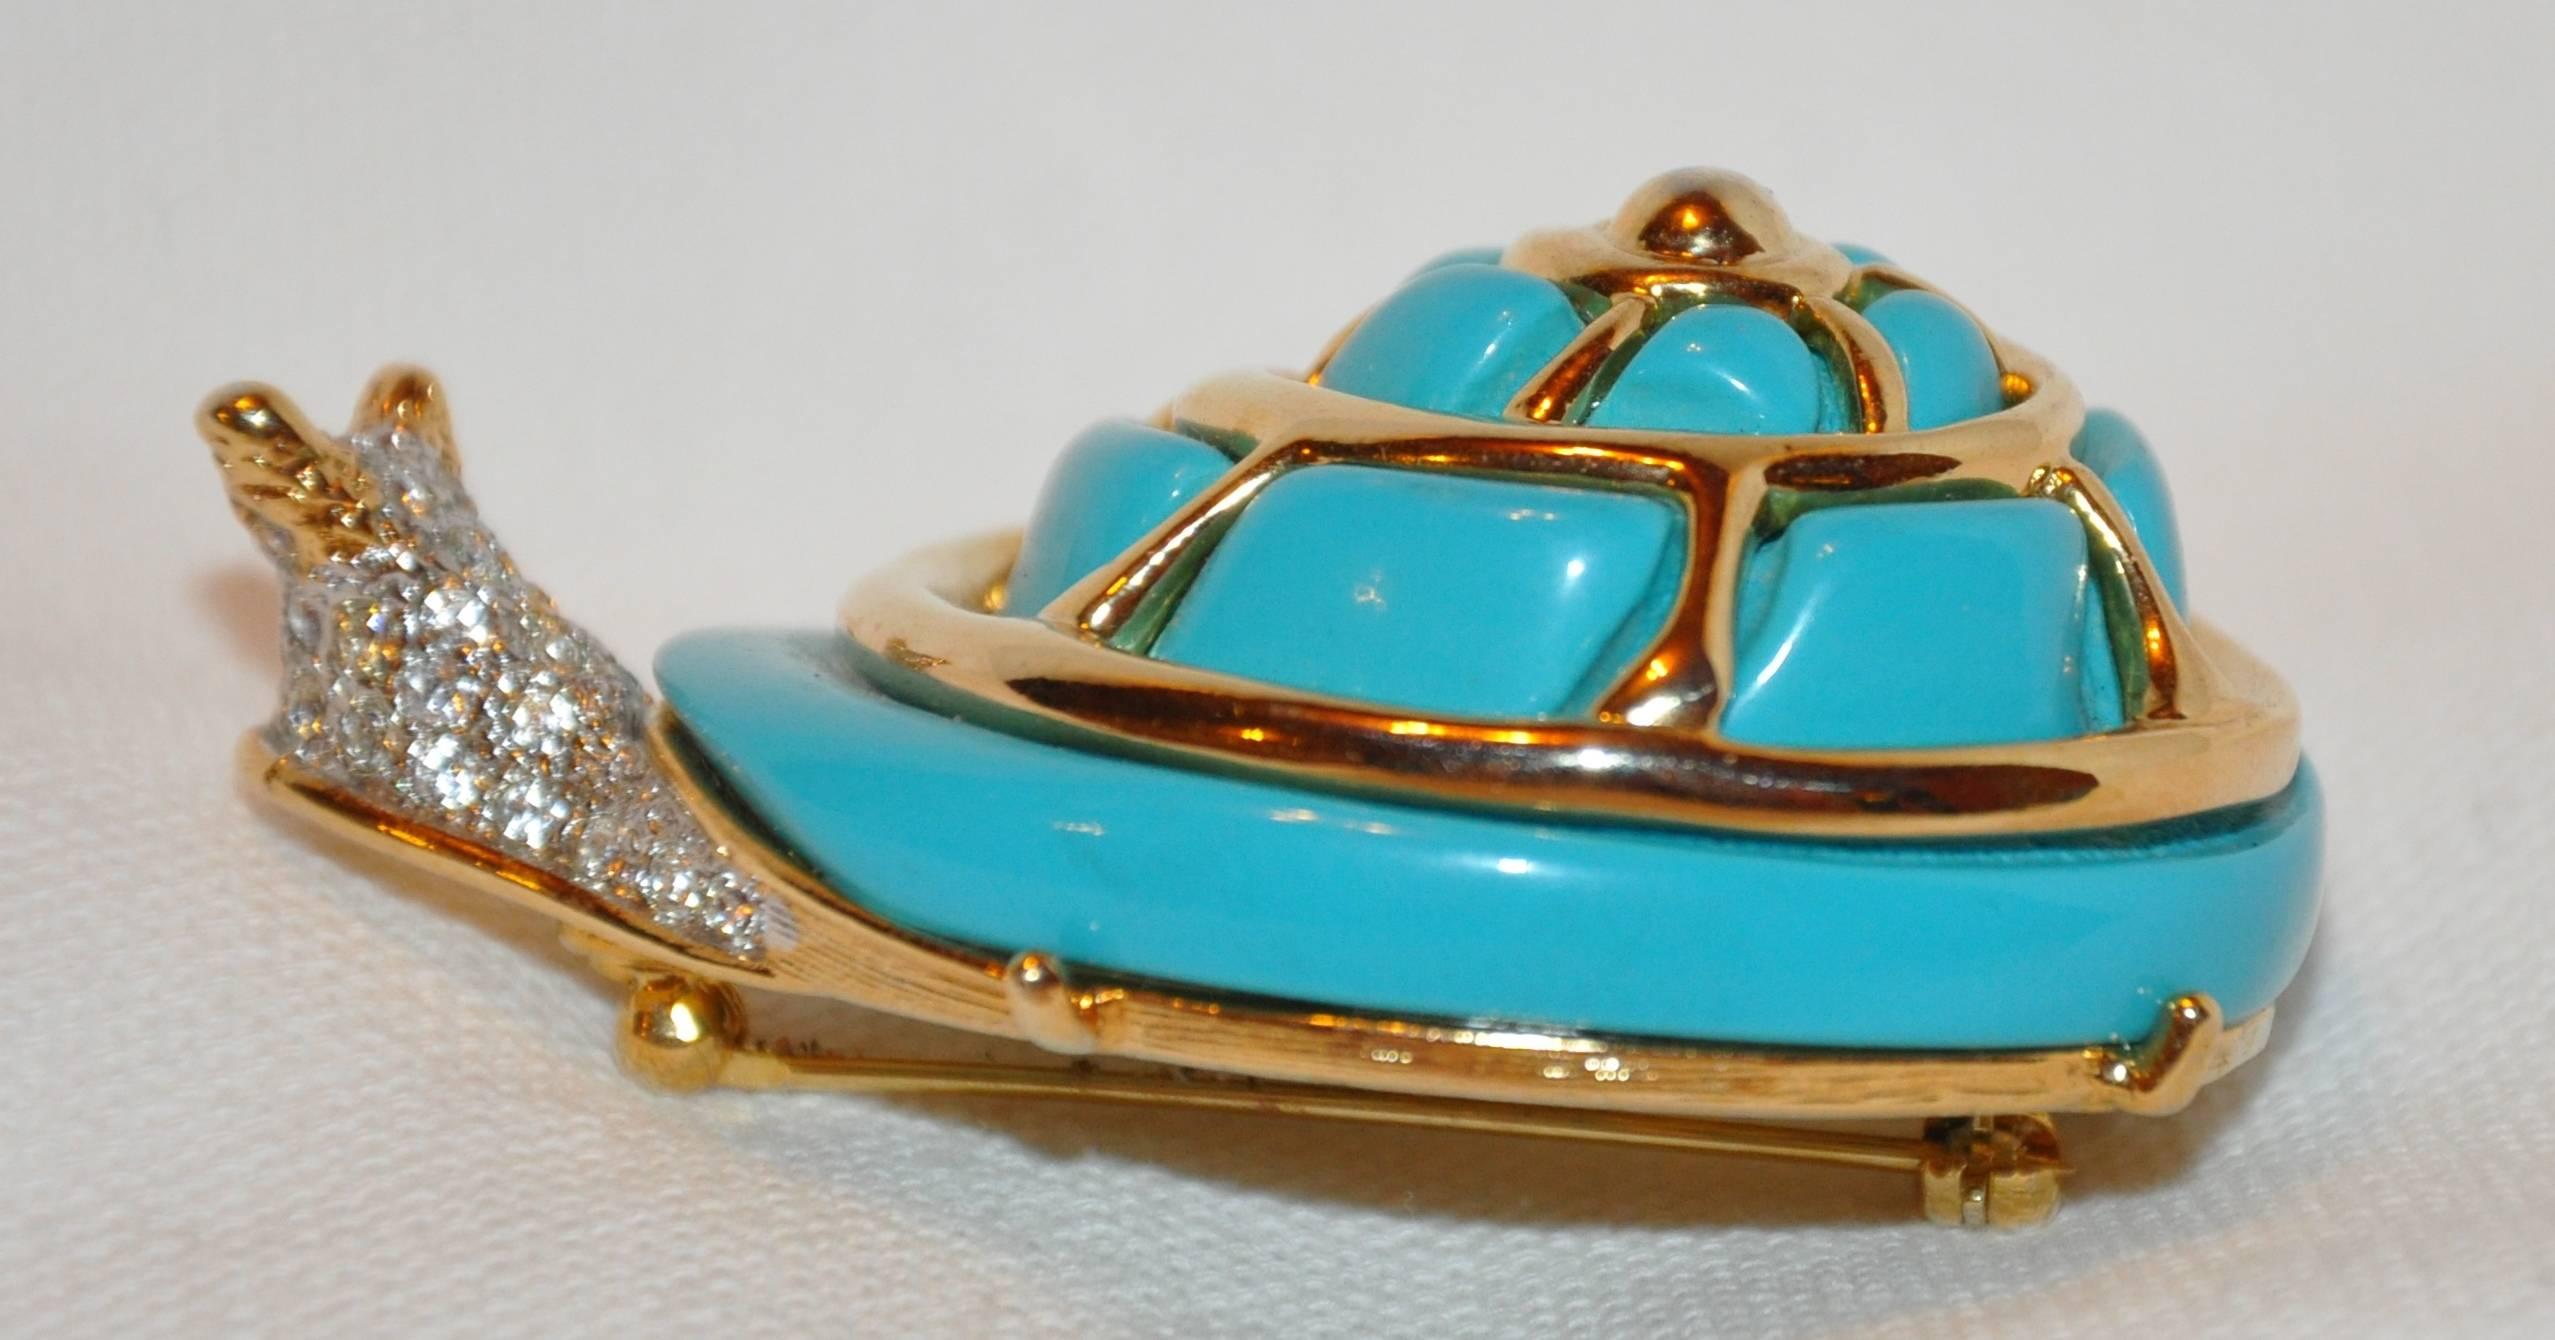        Kenneth Jay Lane wonderfully huge detailed whimsical "Snail" with faux turquoise set in polished gilded gold vermeil hardware is accented with faux diamonds, and measures 2 3/8" in length and 1 1/2" in width, depth is